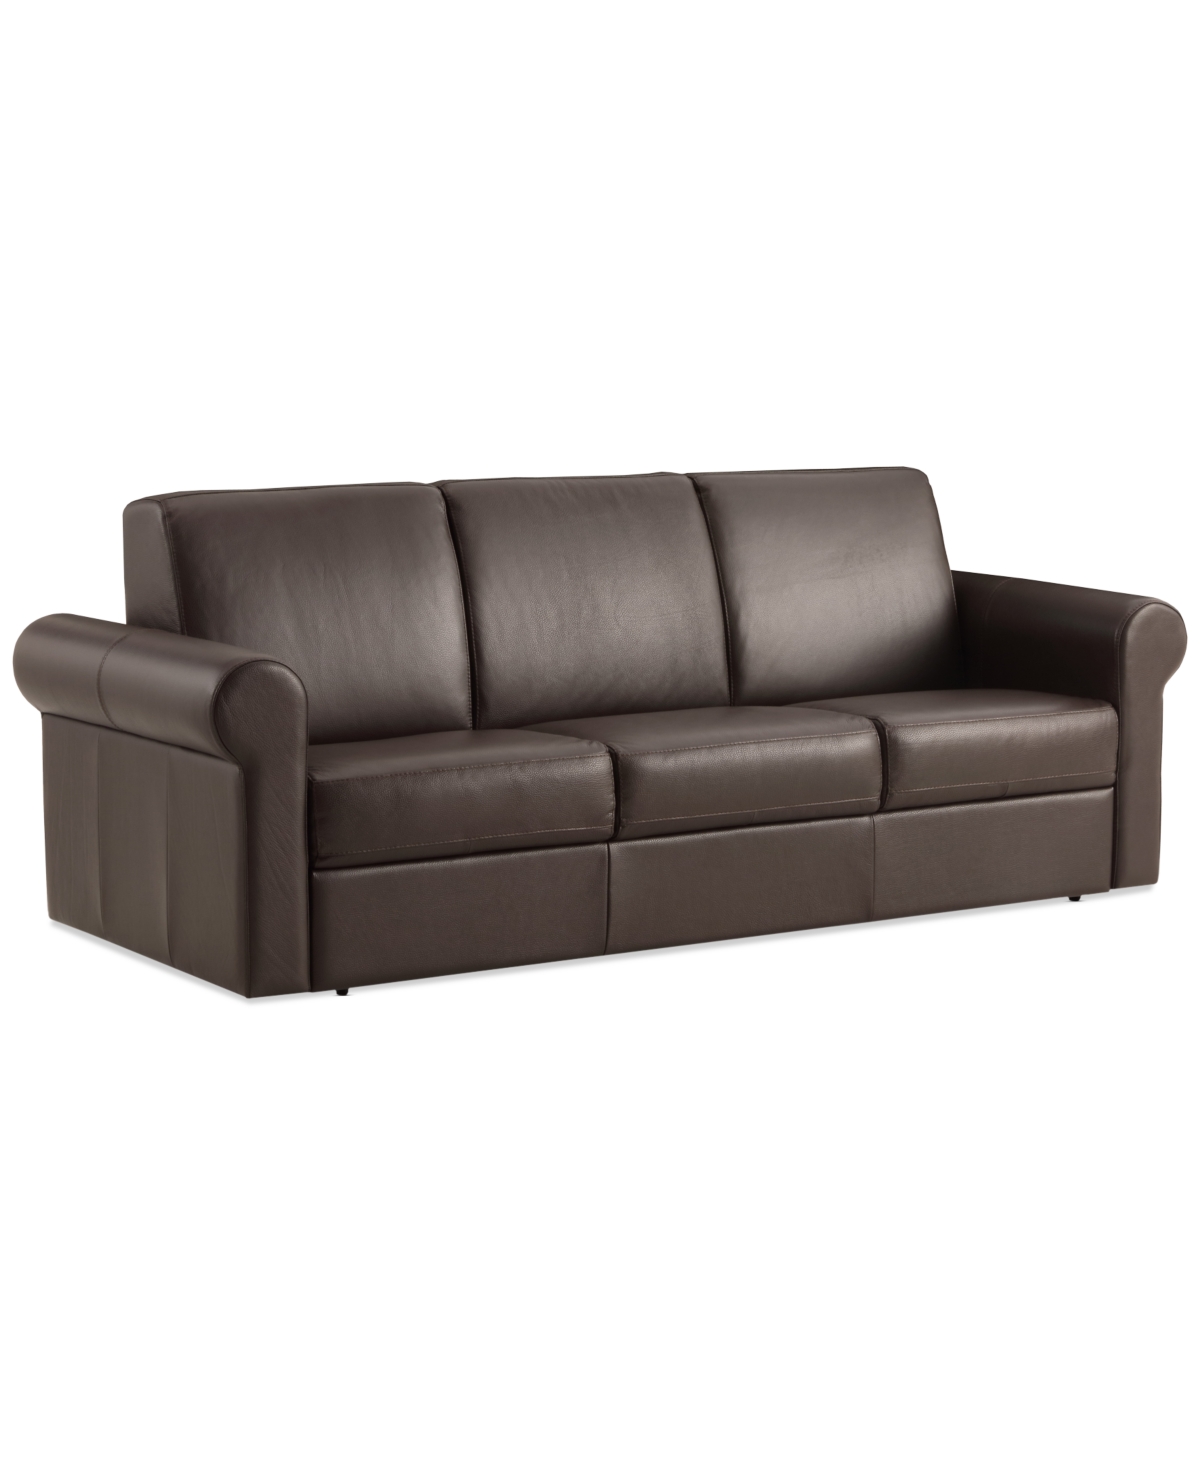 Macy's Elsher 85" Leather Sleeper Sofa, Created For  In Brown